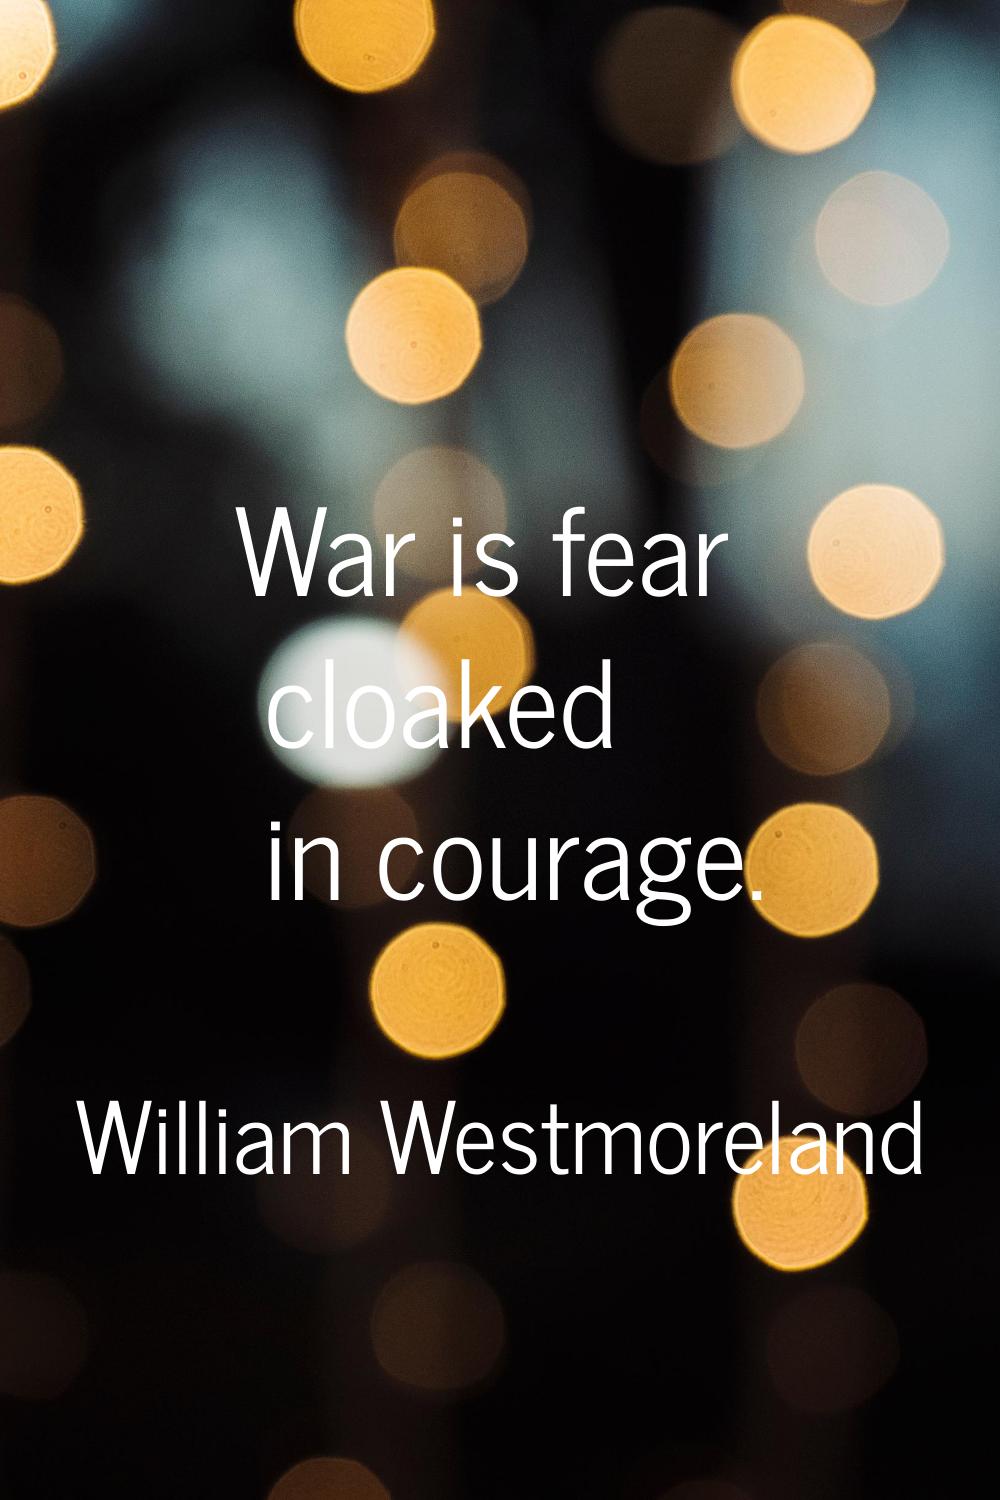 War is fear cloaked in courage.